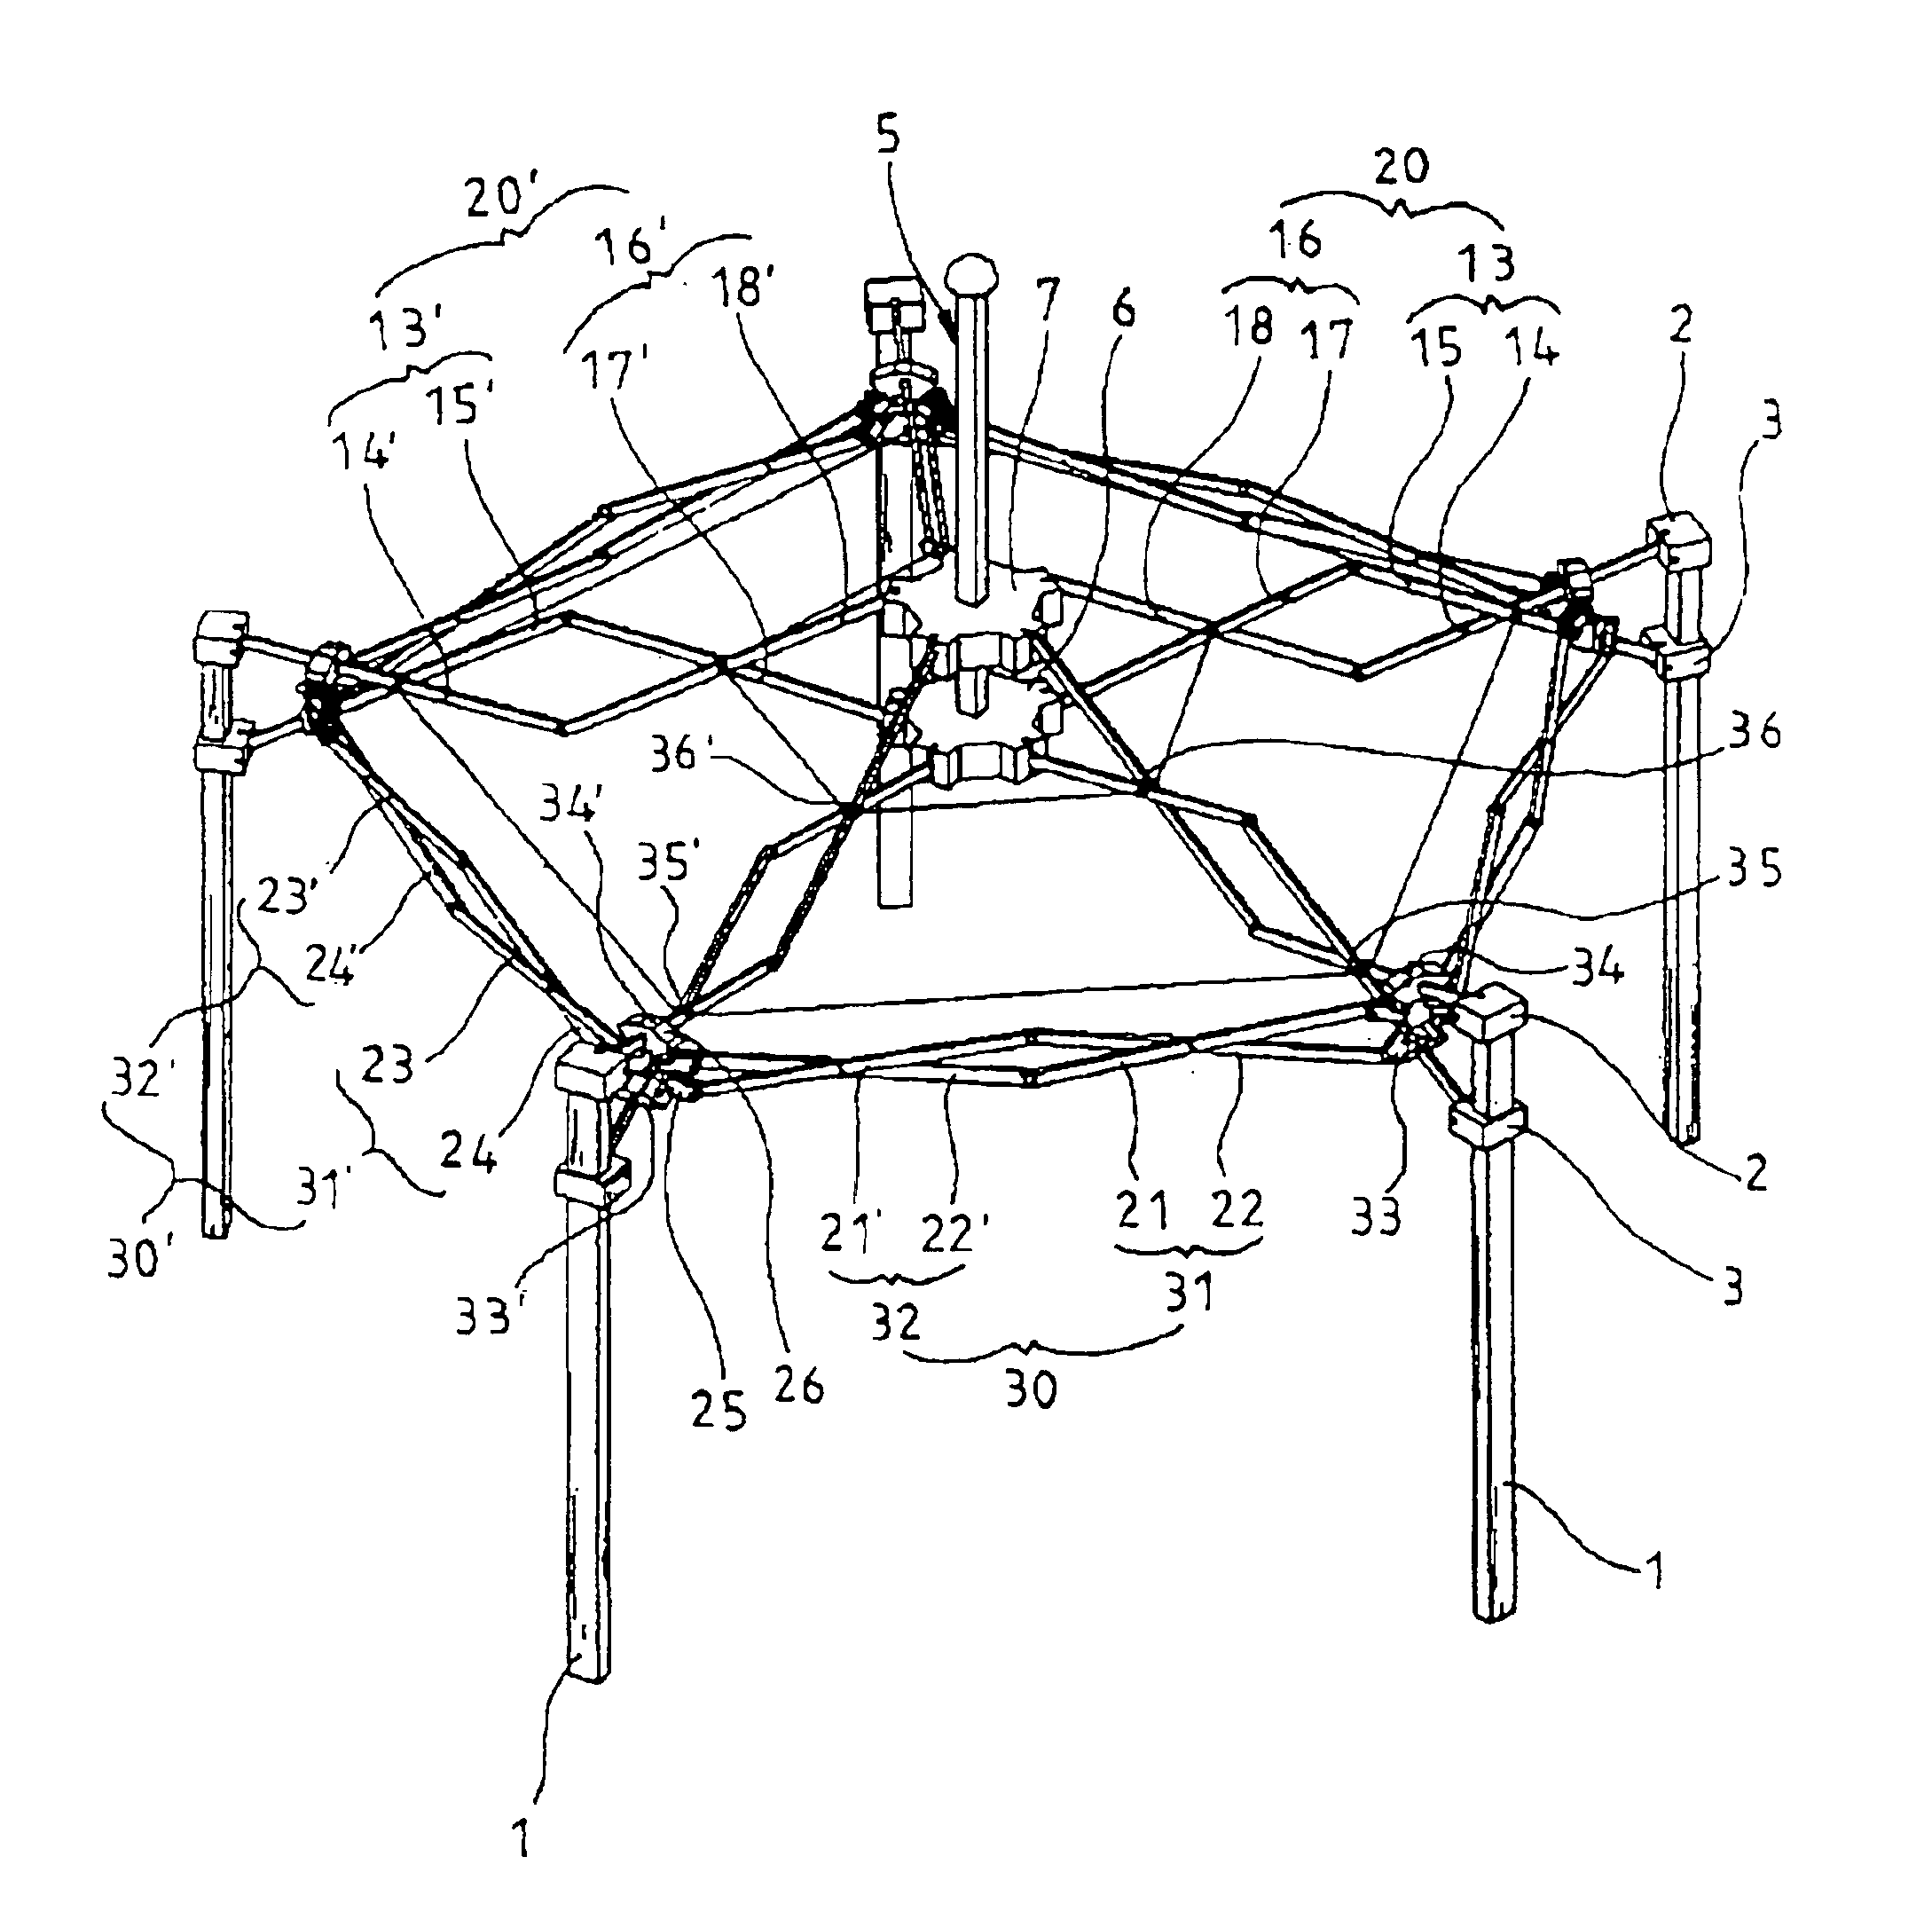 Collapsible canopy framework structure of a regular polygon